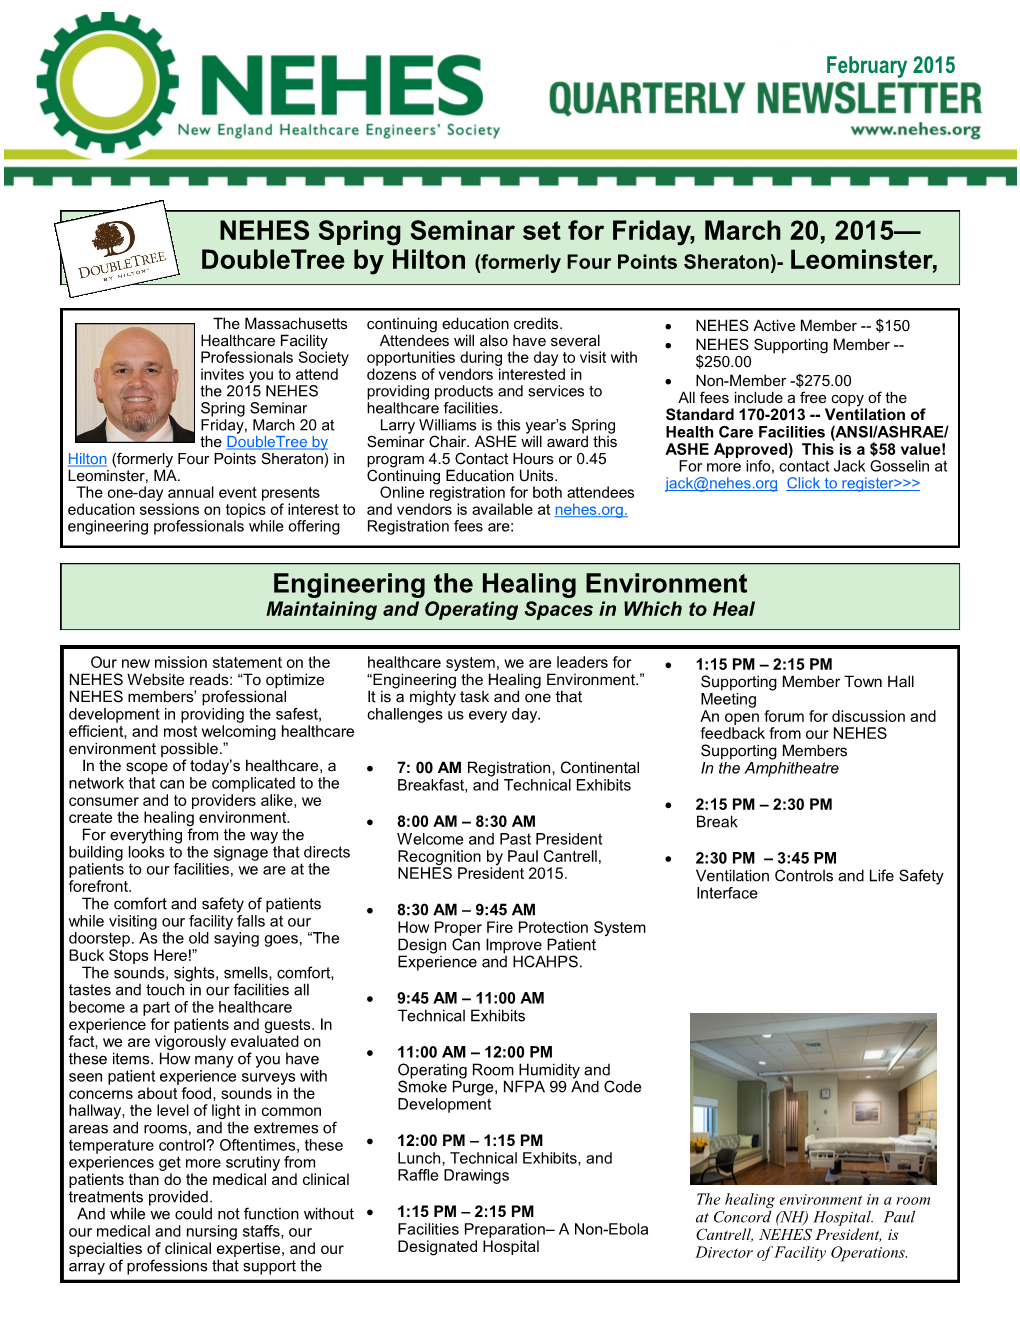 NEHES Spring Seminar Set for Friday, March 20, 2015— Doubletree by Hilton (Formerly Four Points Sheraton)- Leominster